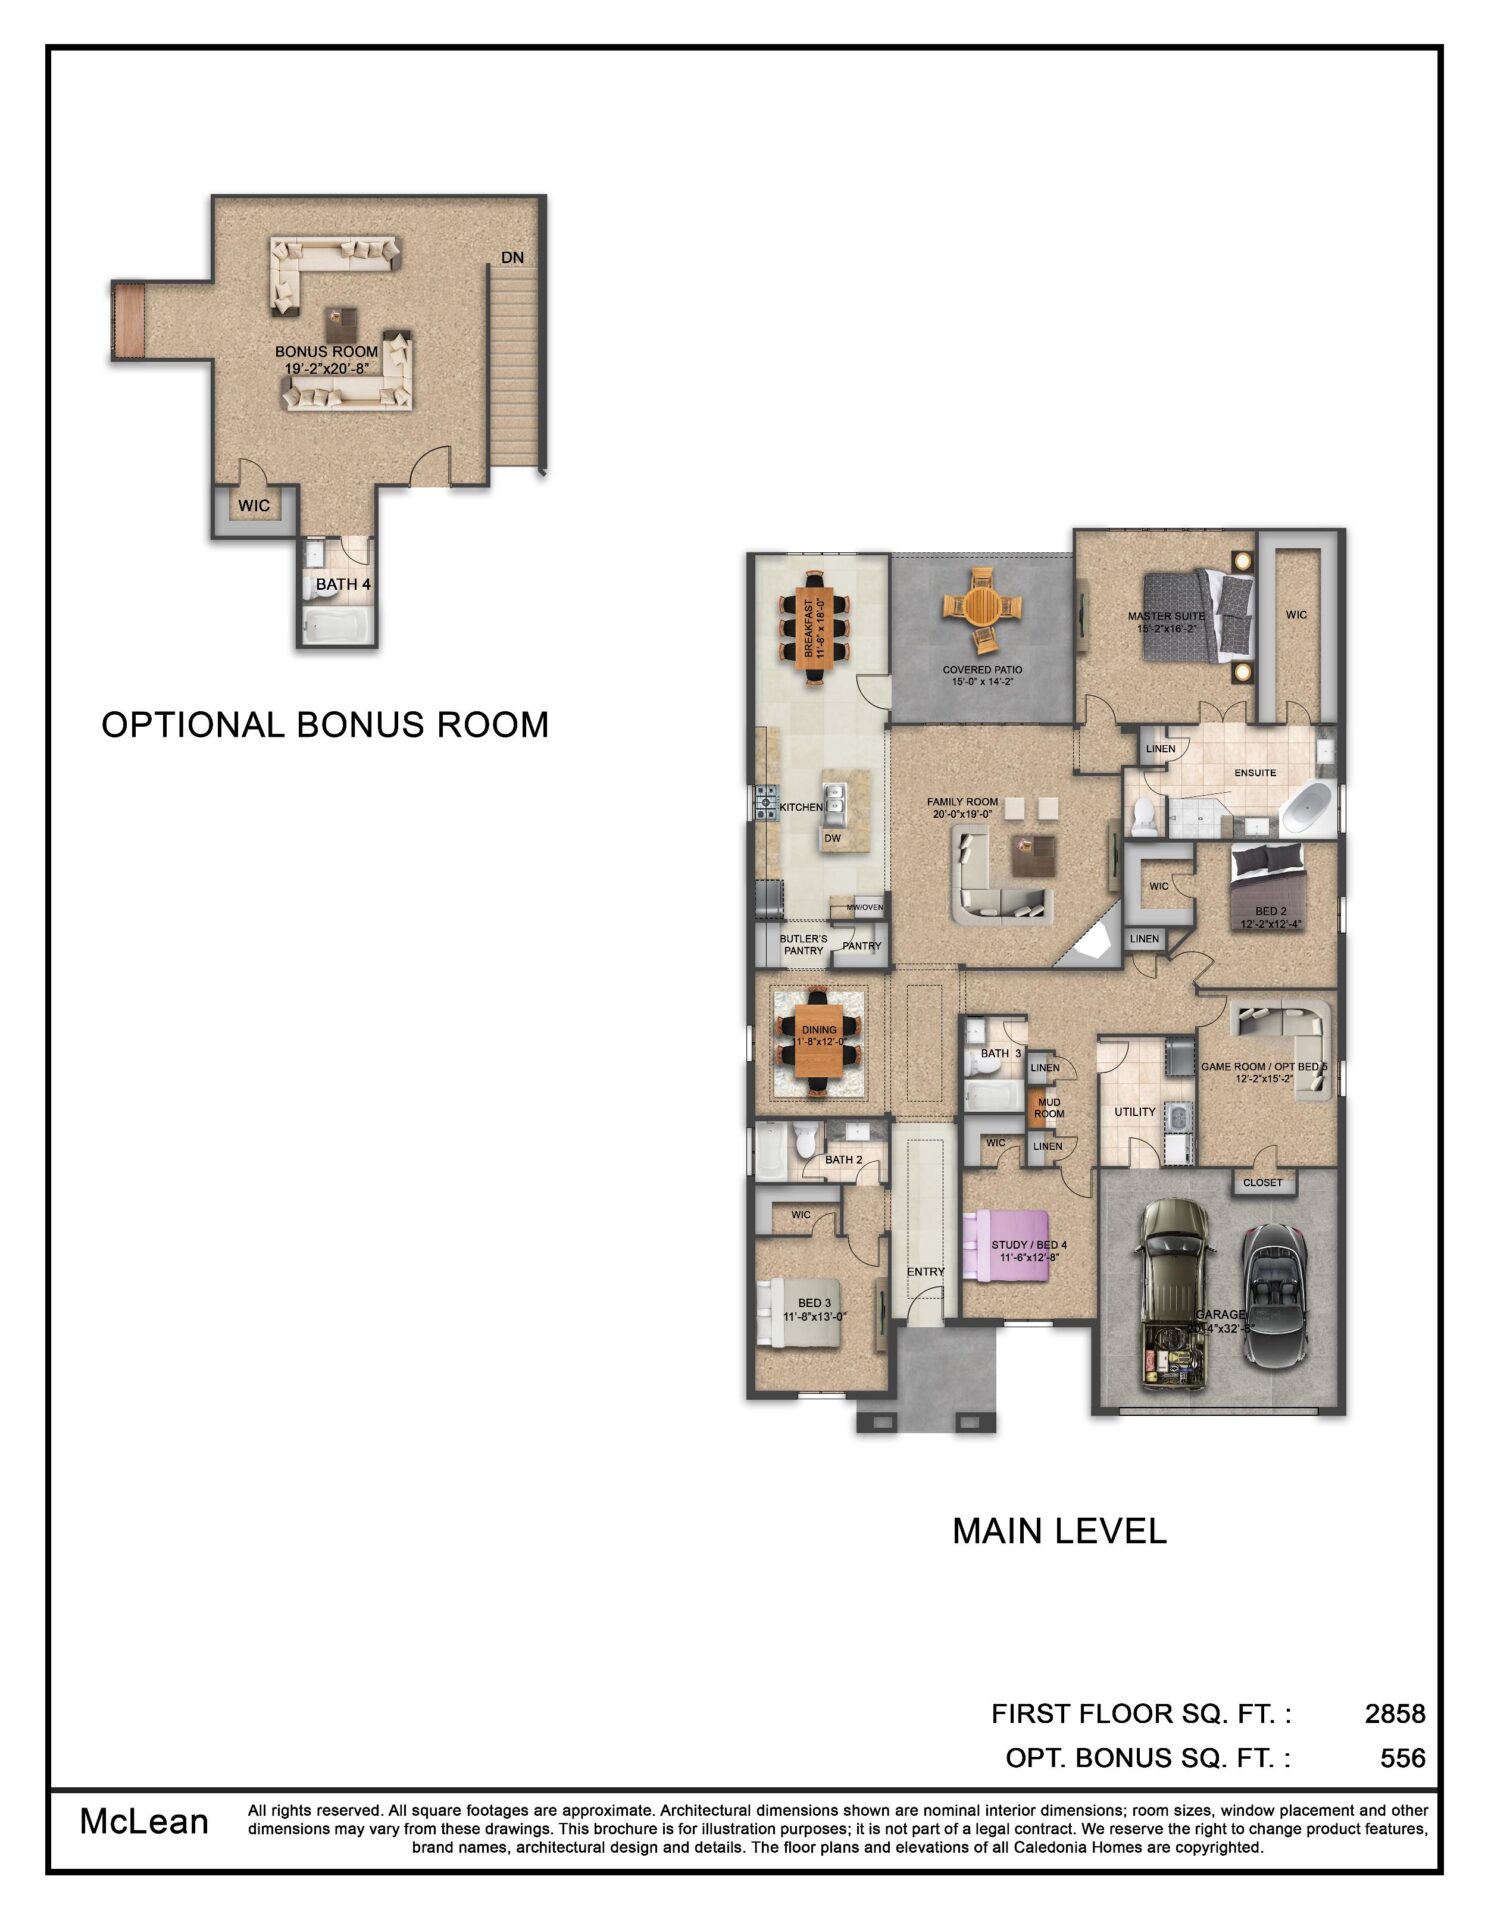 A floor plan with two bedrooms and two bathrooms.